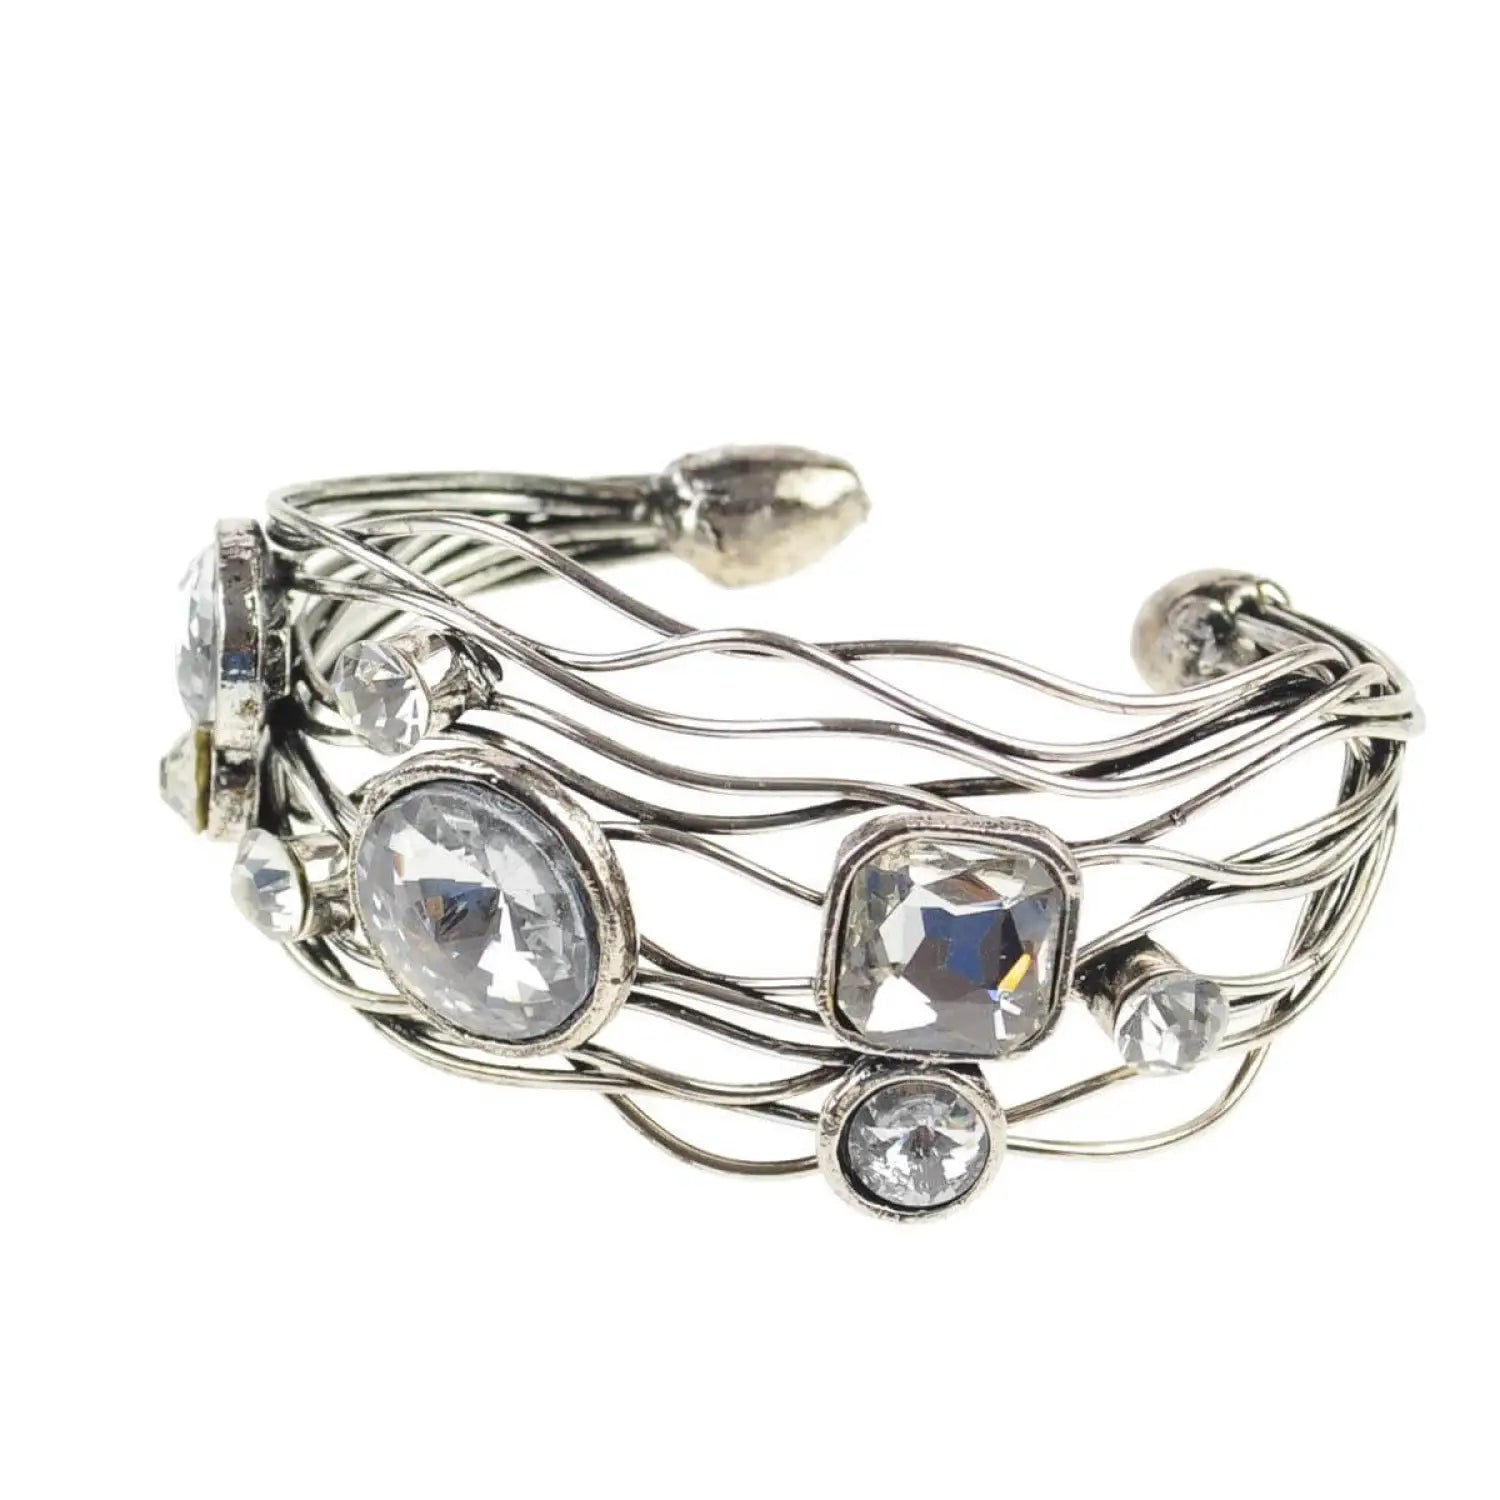 Multi layered statement bracelet with crystals